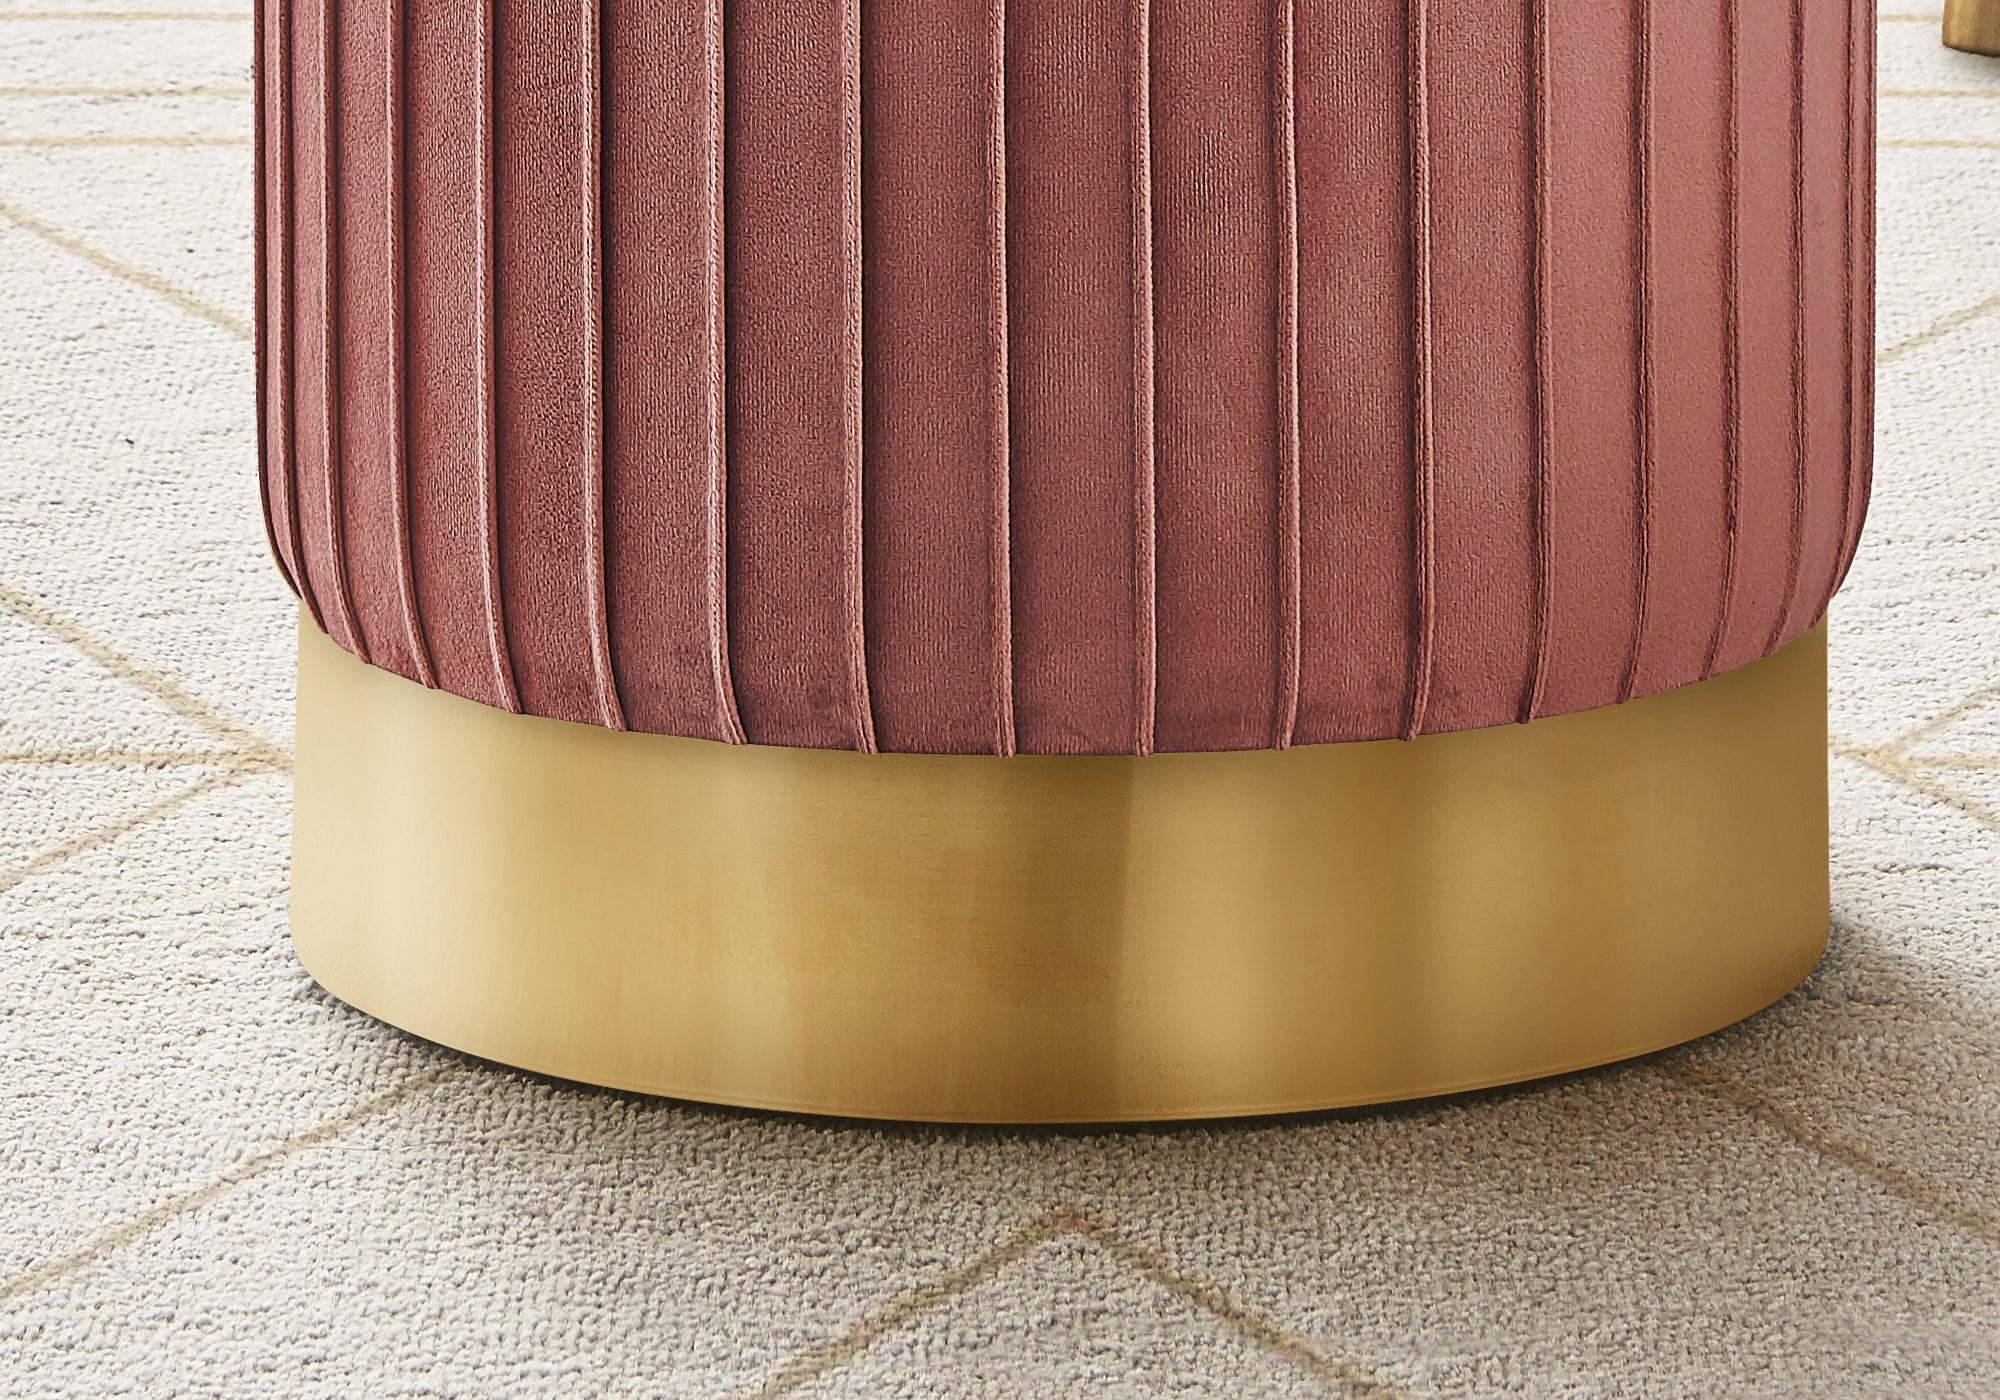 MN-289017    Ottoman, Pouf, Footrest, Foot Stool, 14" Round, Velvet Fabric, Metal Base, Pink, Gold, Contemporary, Glam, Modern